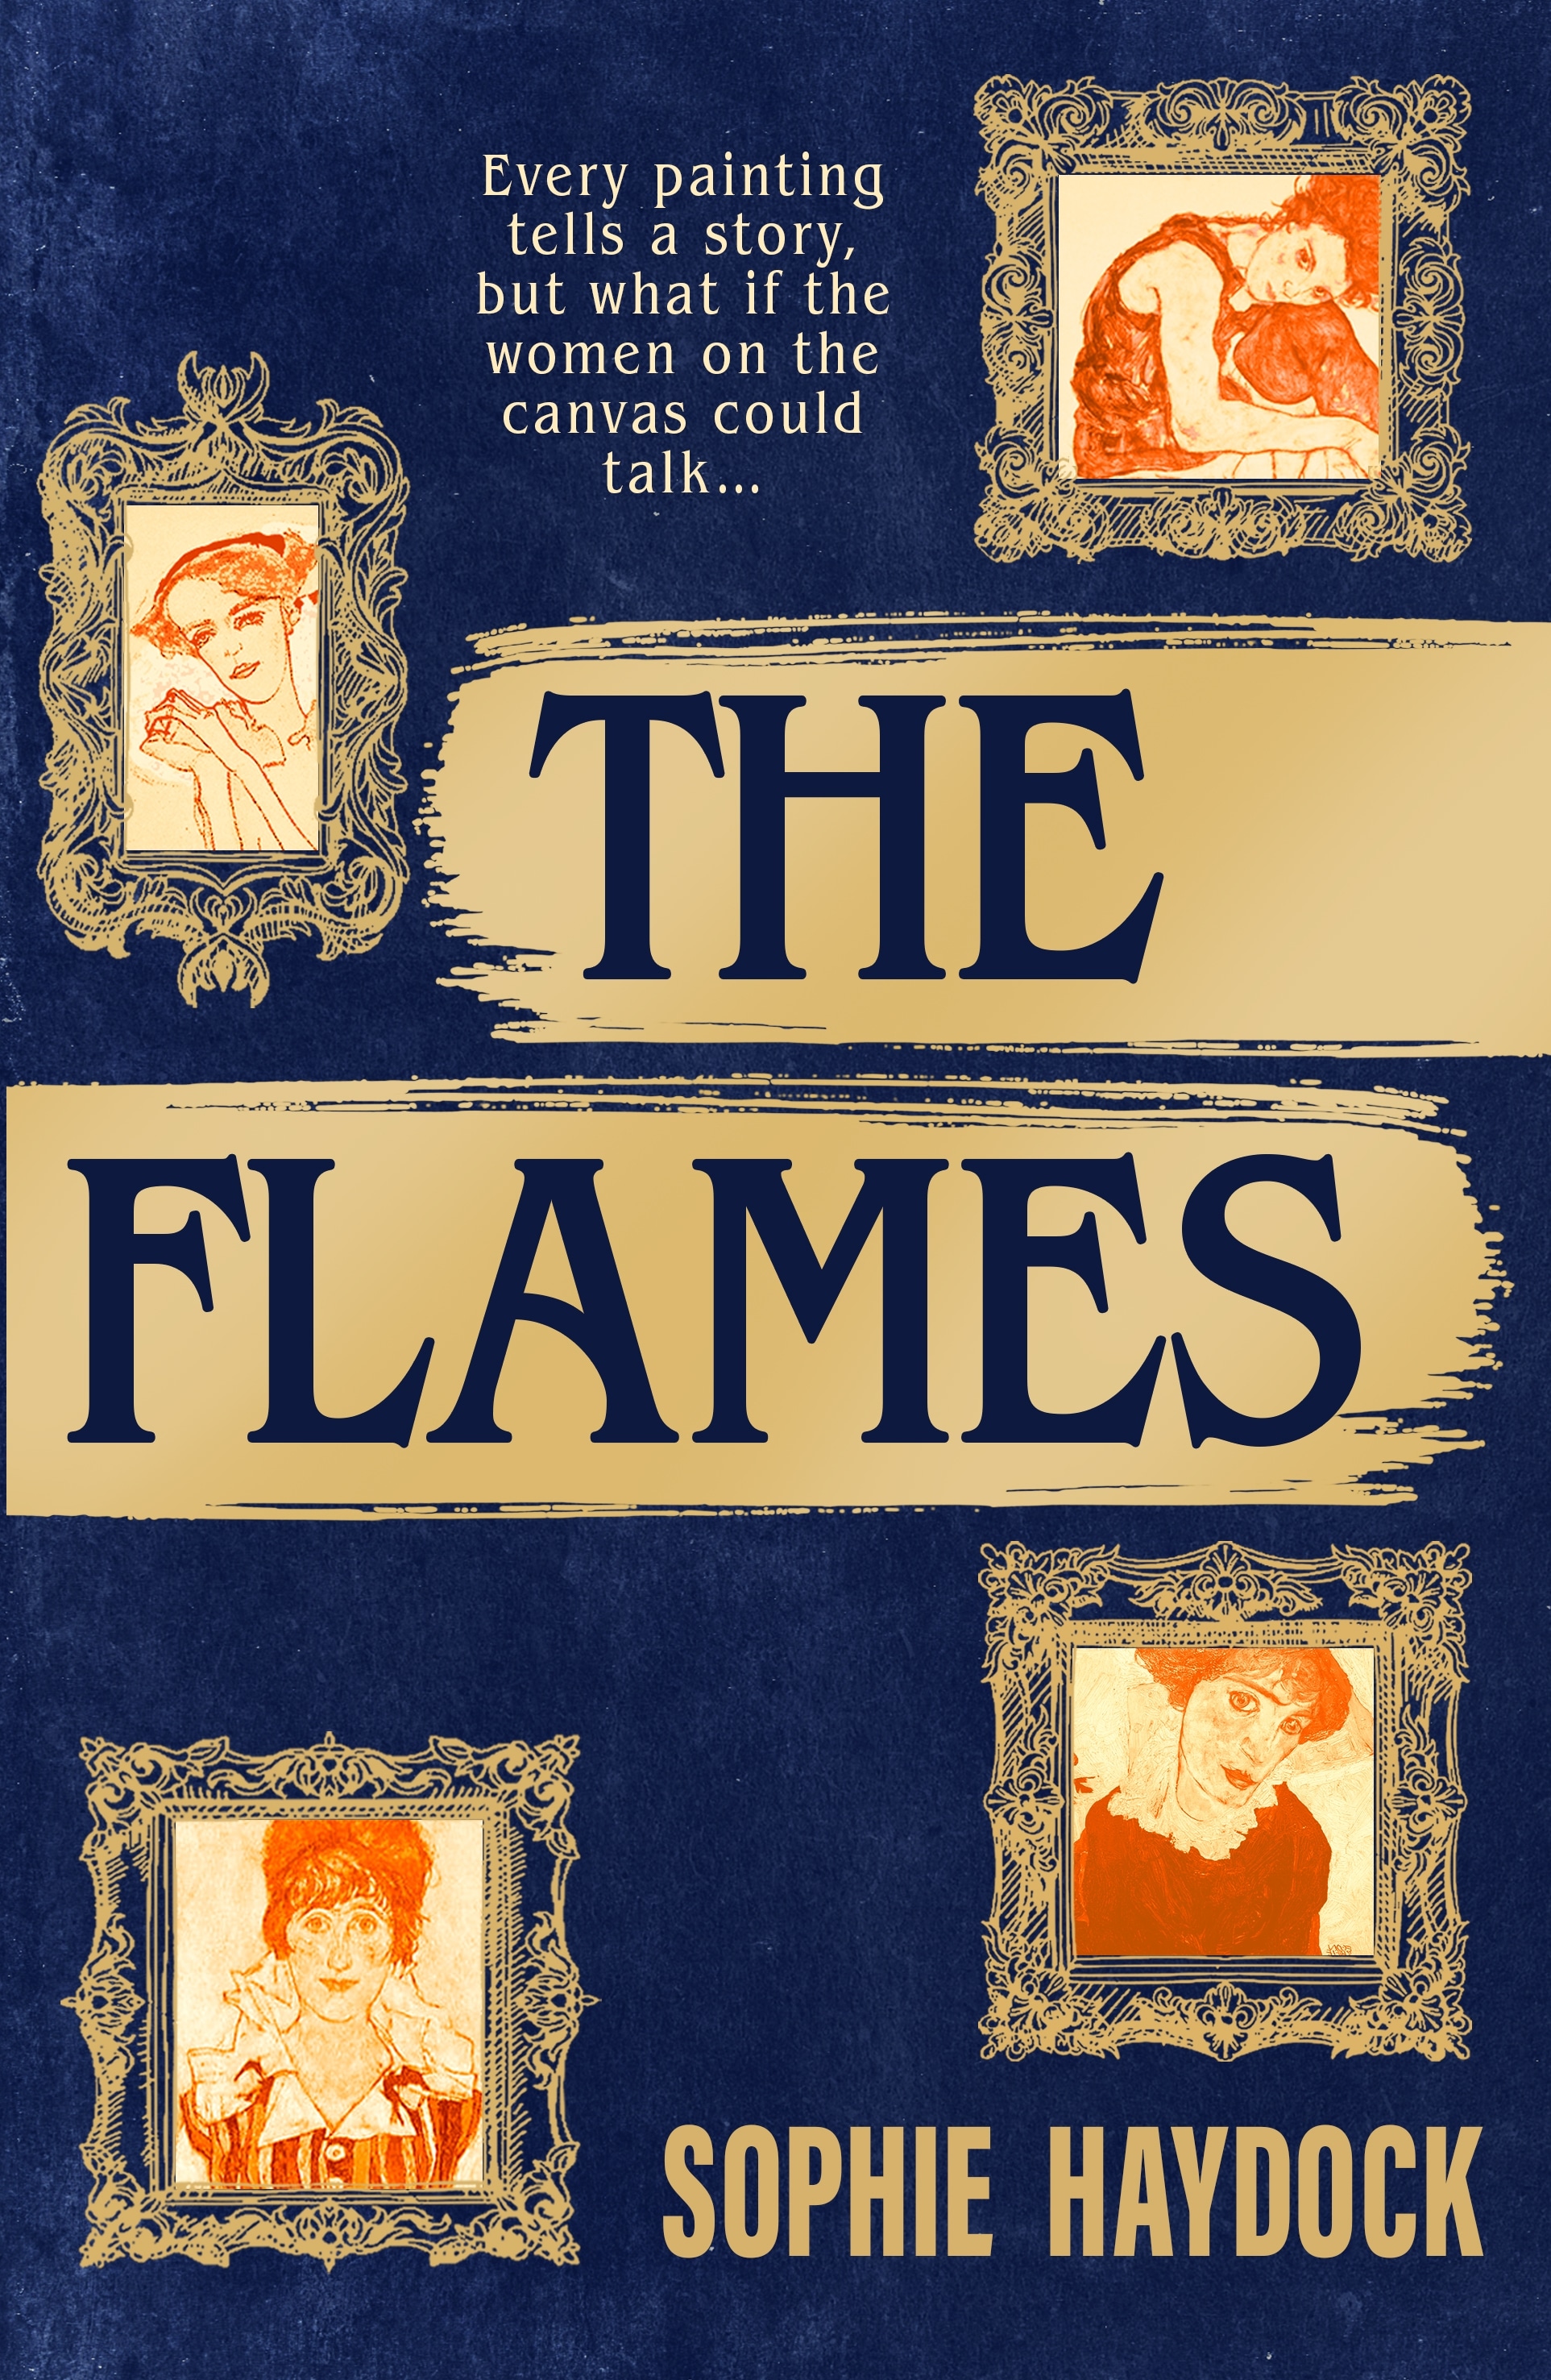 Book “The Flames” by Sophie Haydock — March 3, 2022